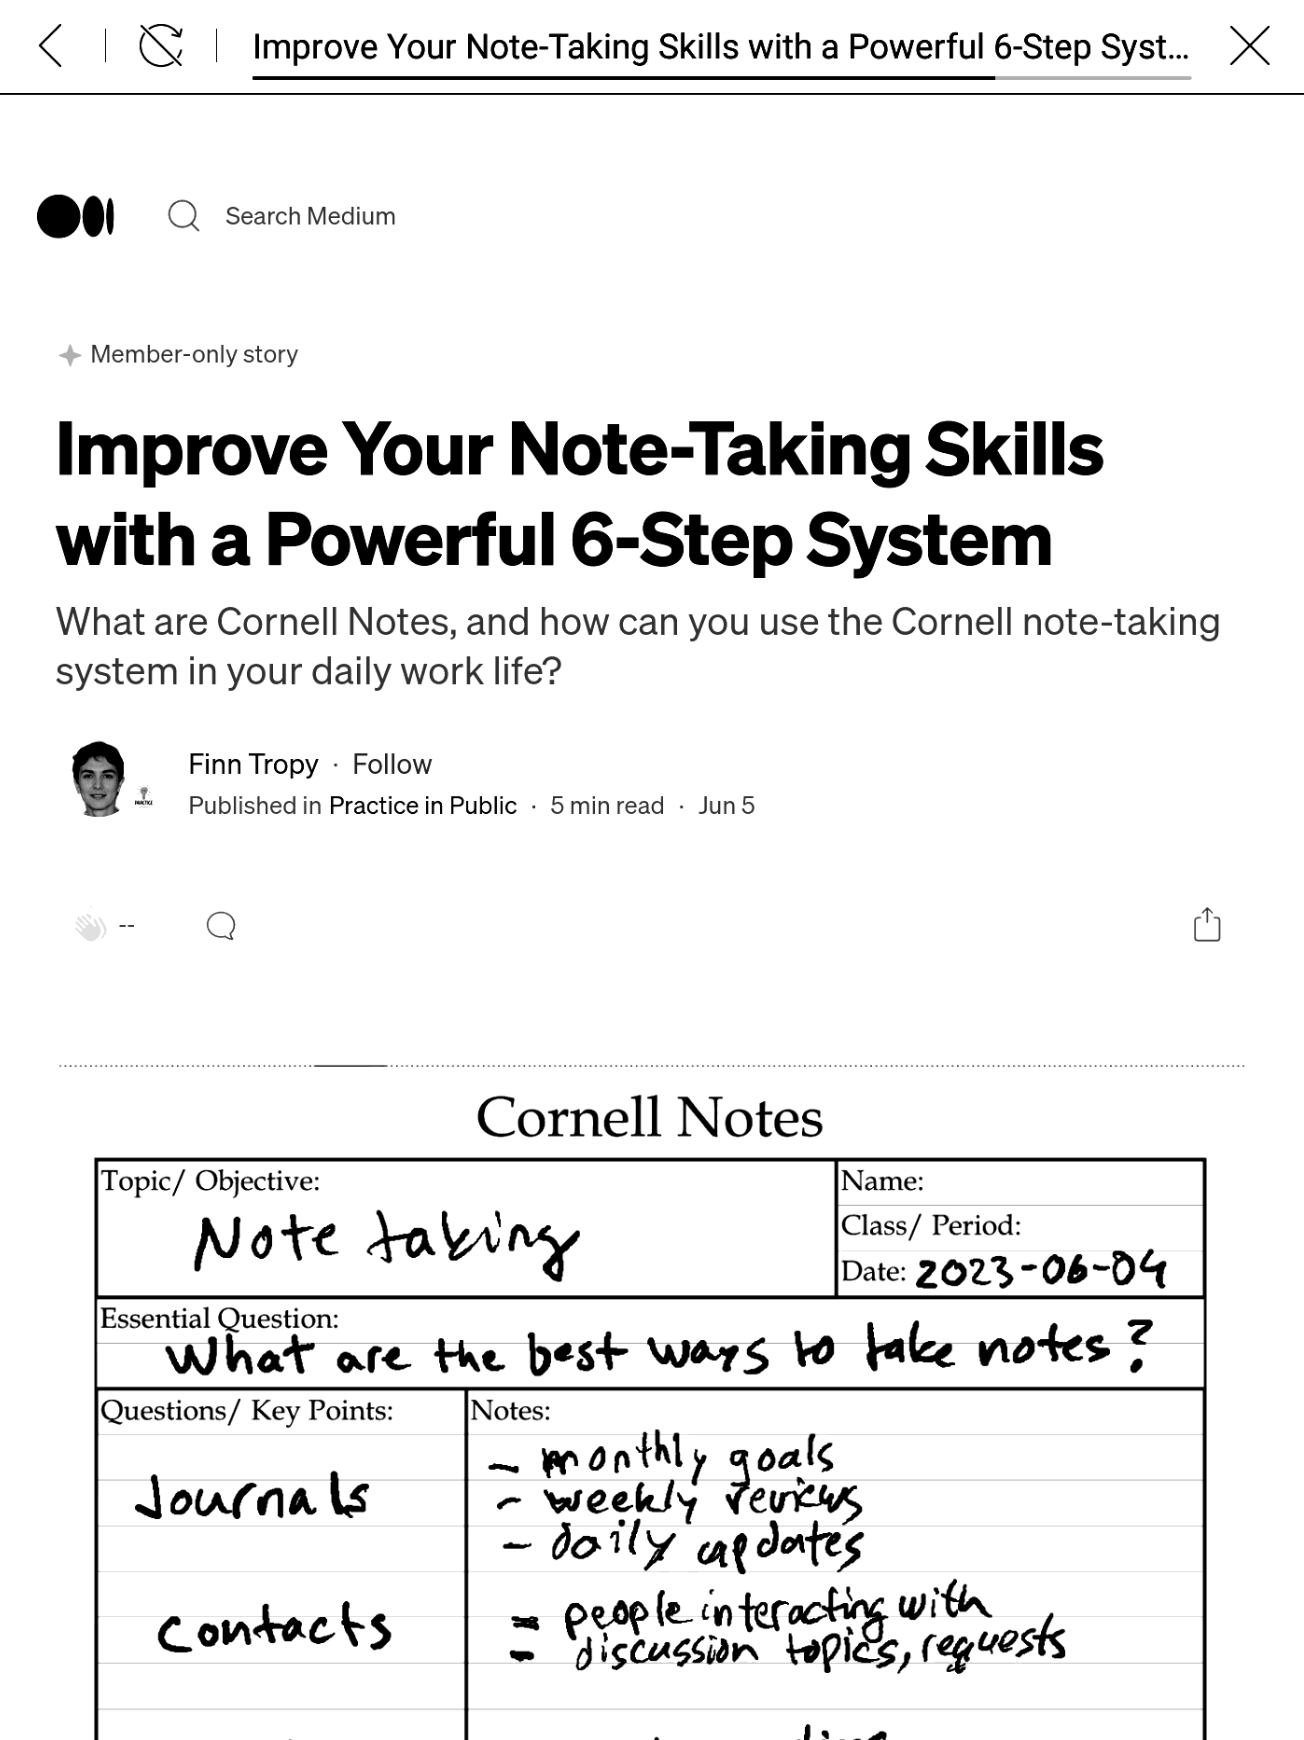 Improve Your Note-Taking Skills with a Powerful 6-Step System